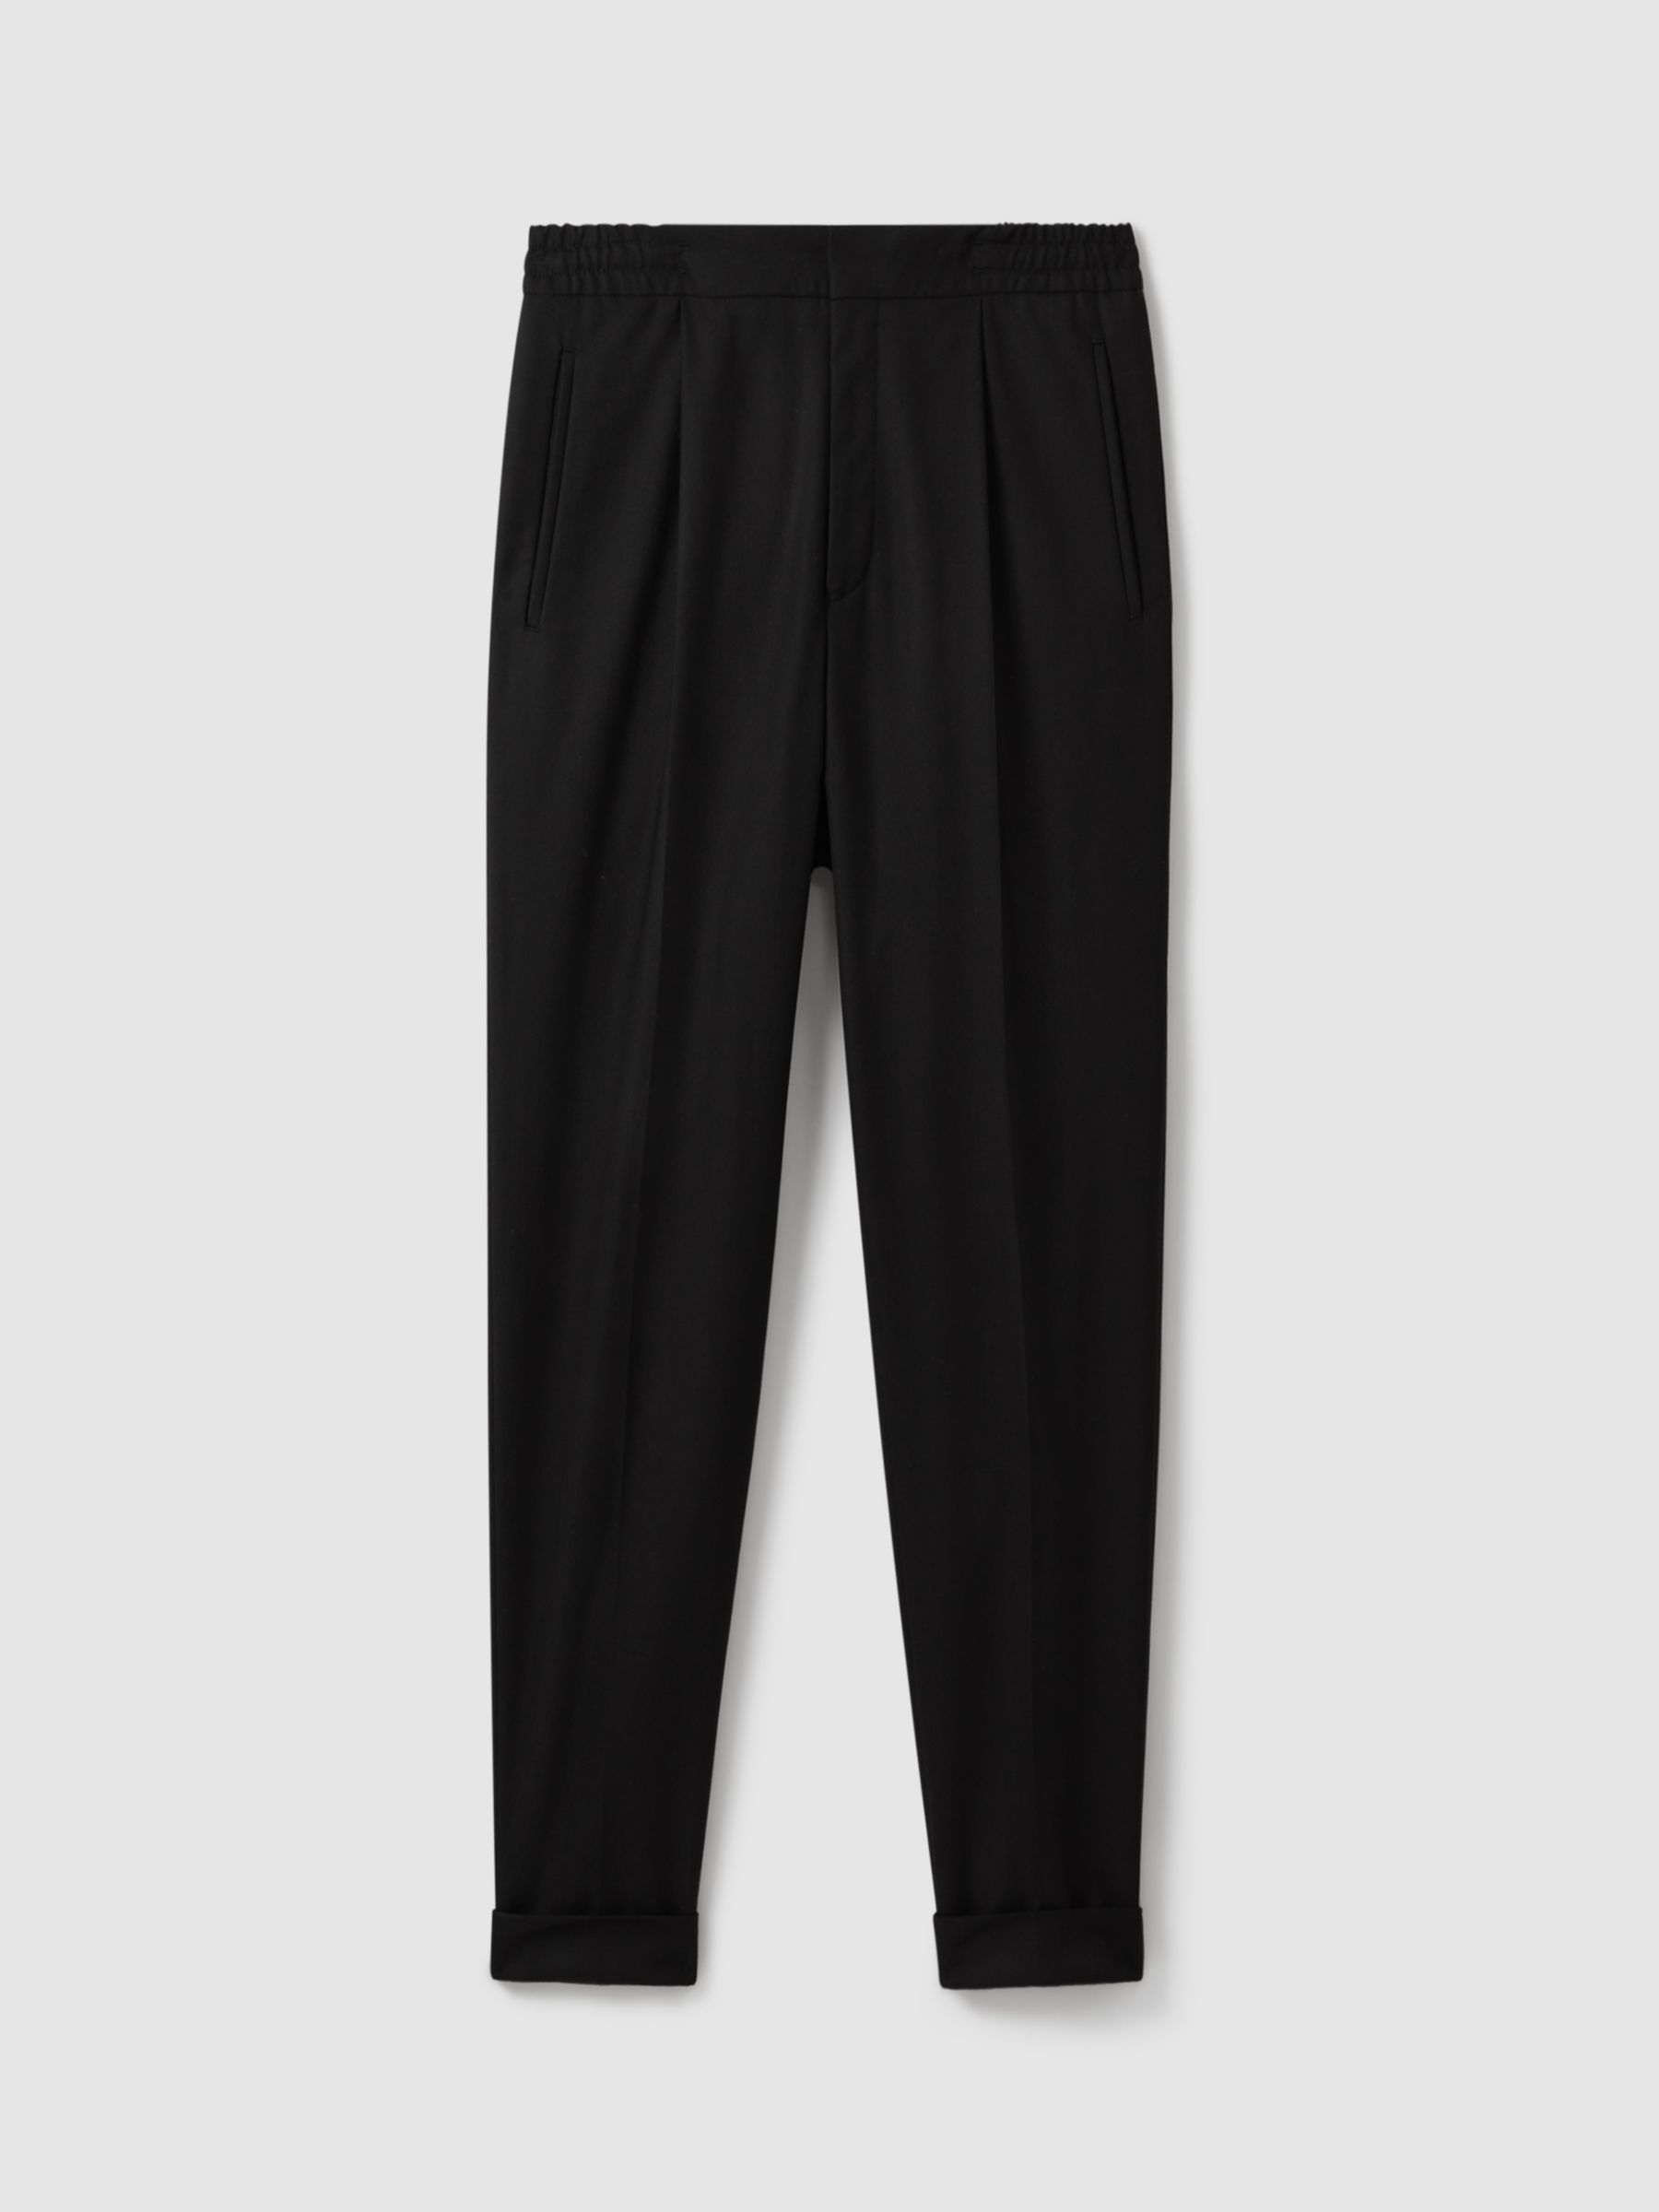 Reiss Brighton Pleated Relaxed Trousers, Black, 36R